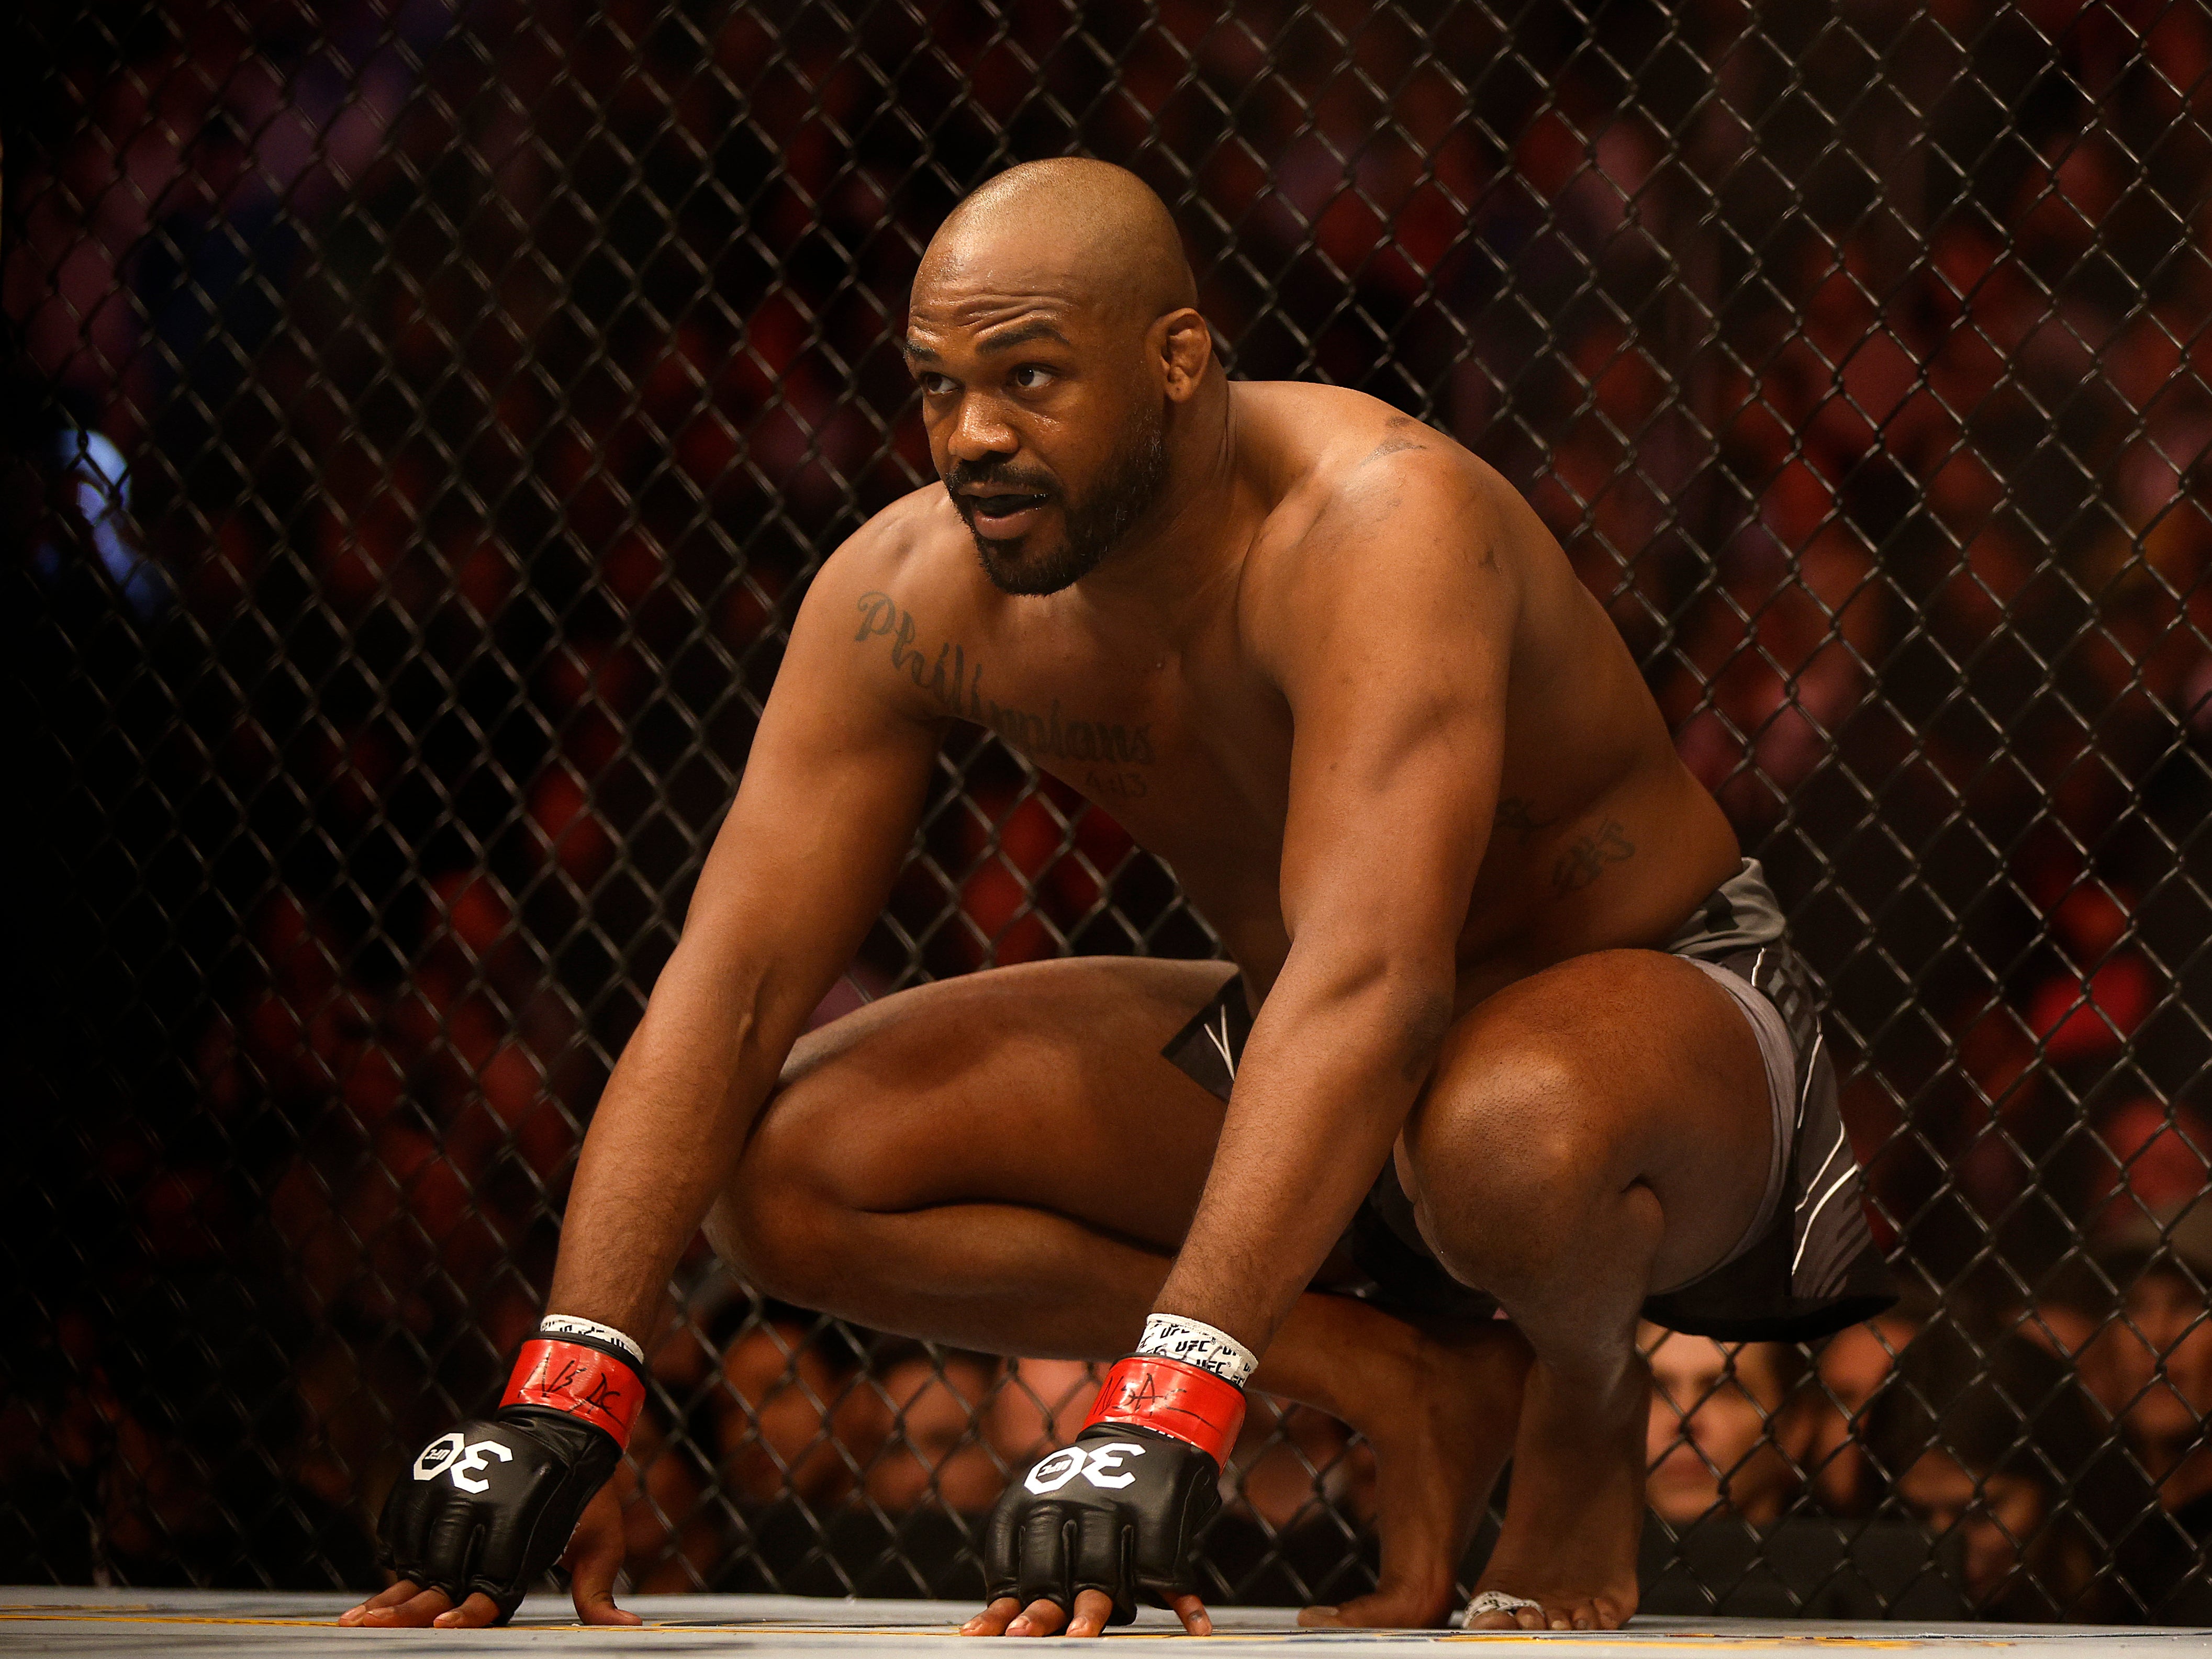 Jon Jones is widely seen as one of the greatest fighters in MMA history